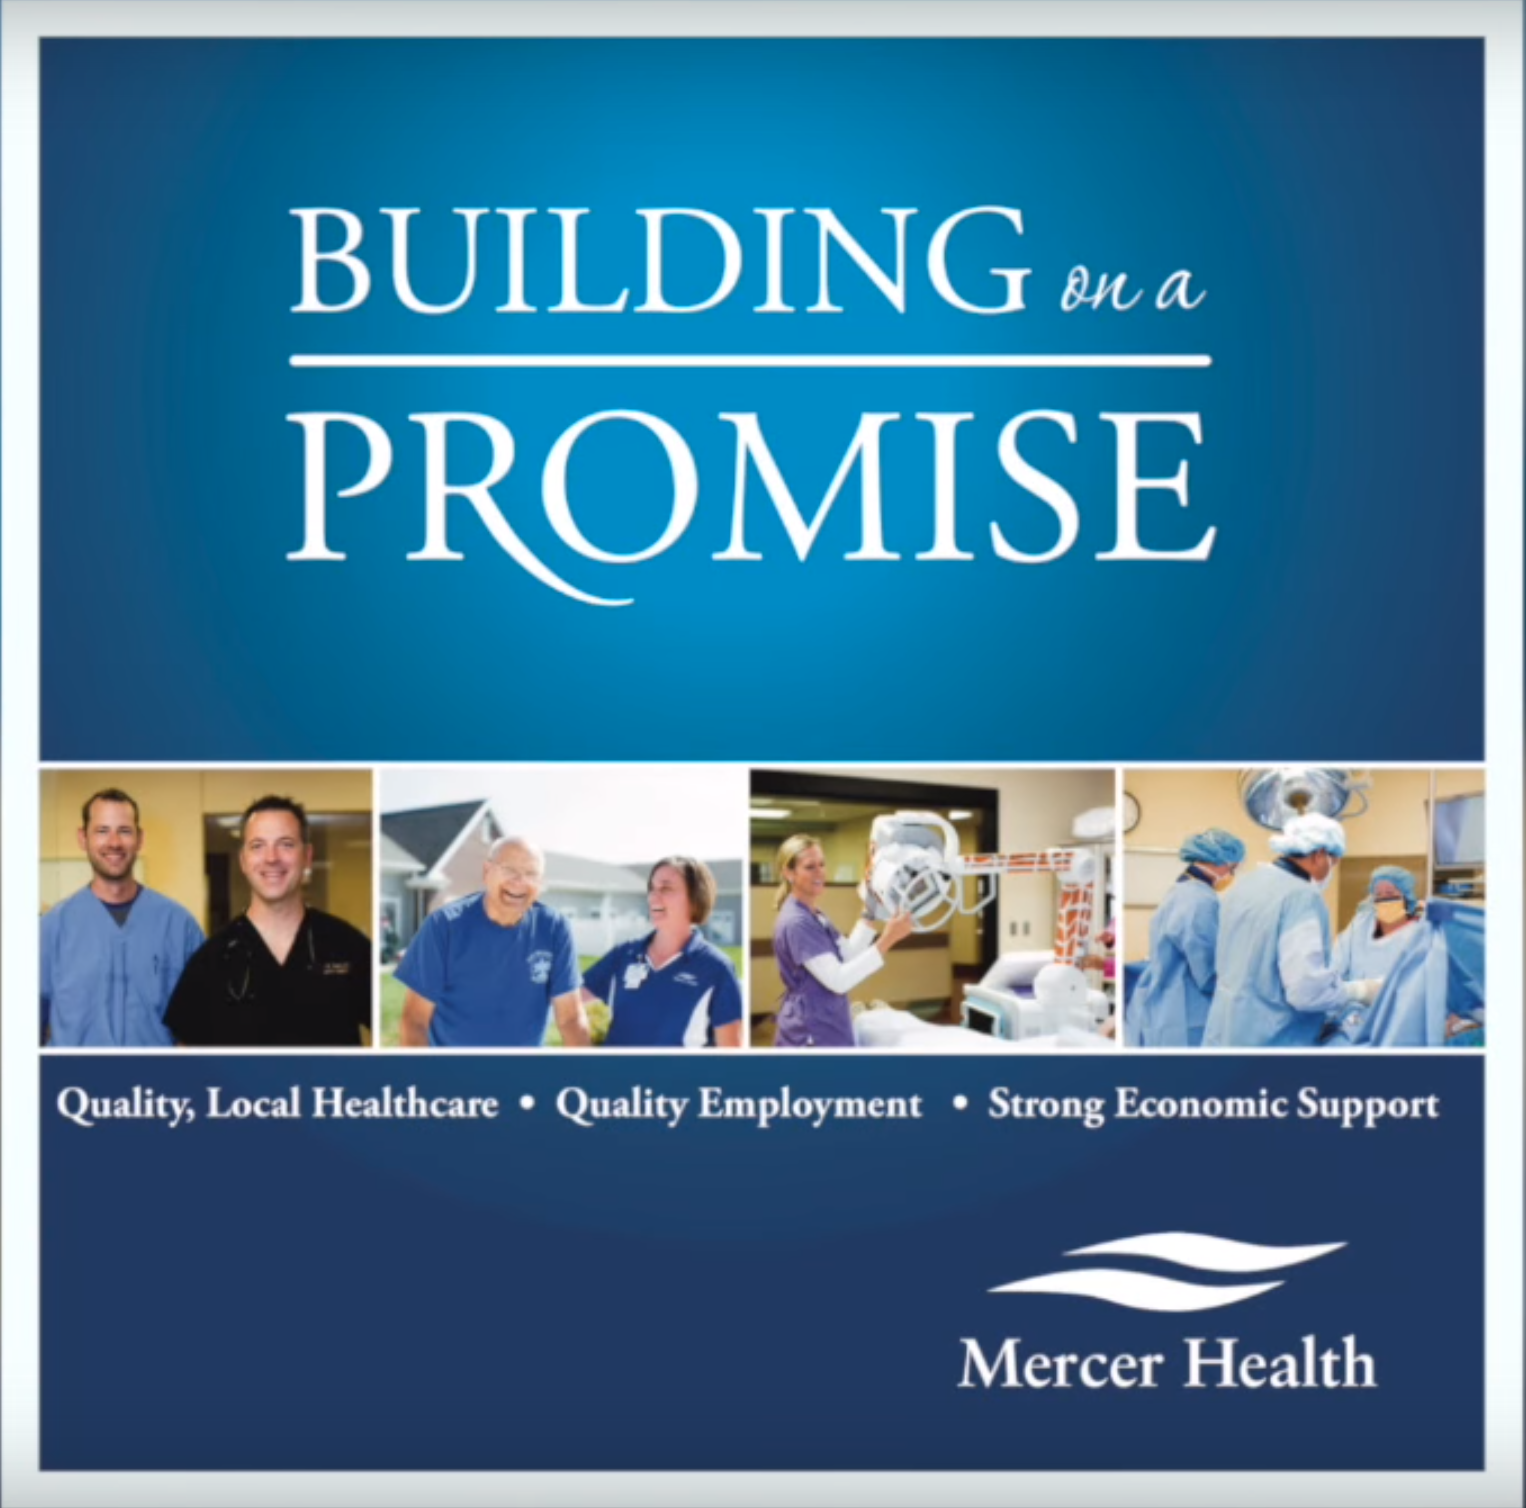 Building on a Promise Campaign Video